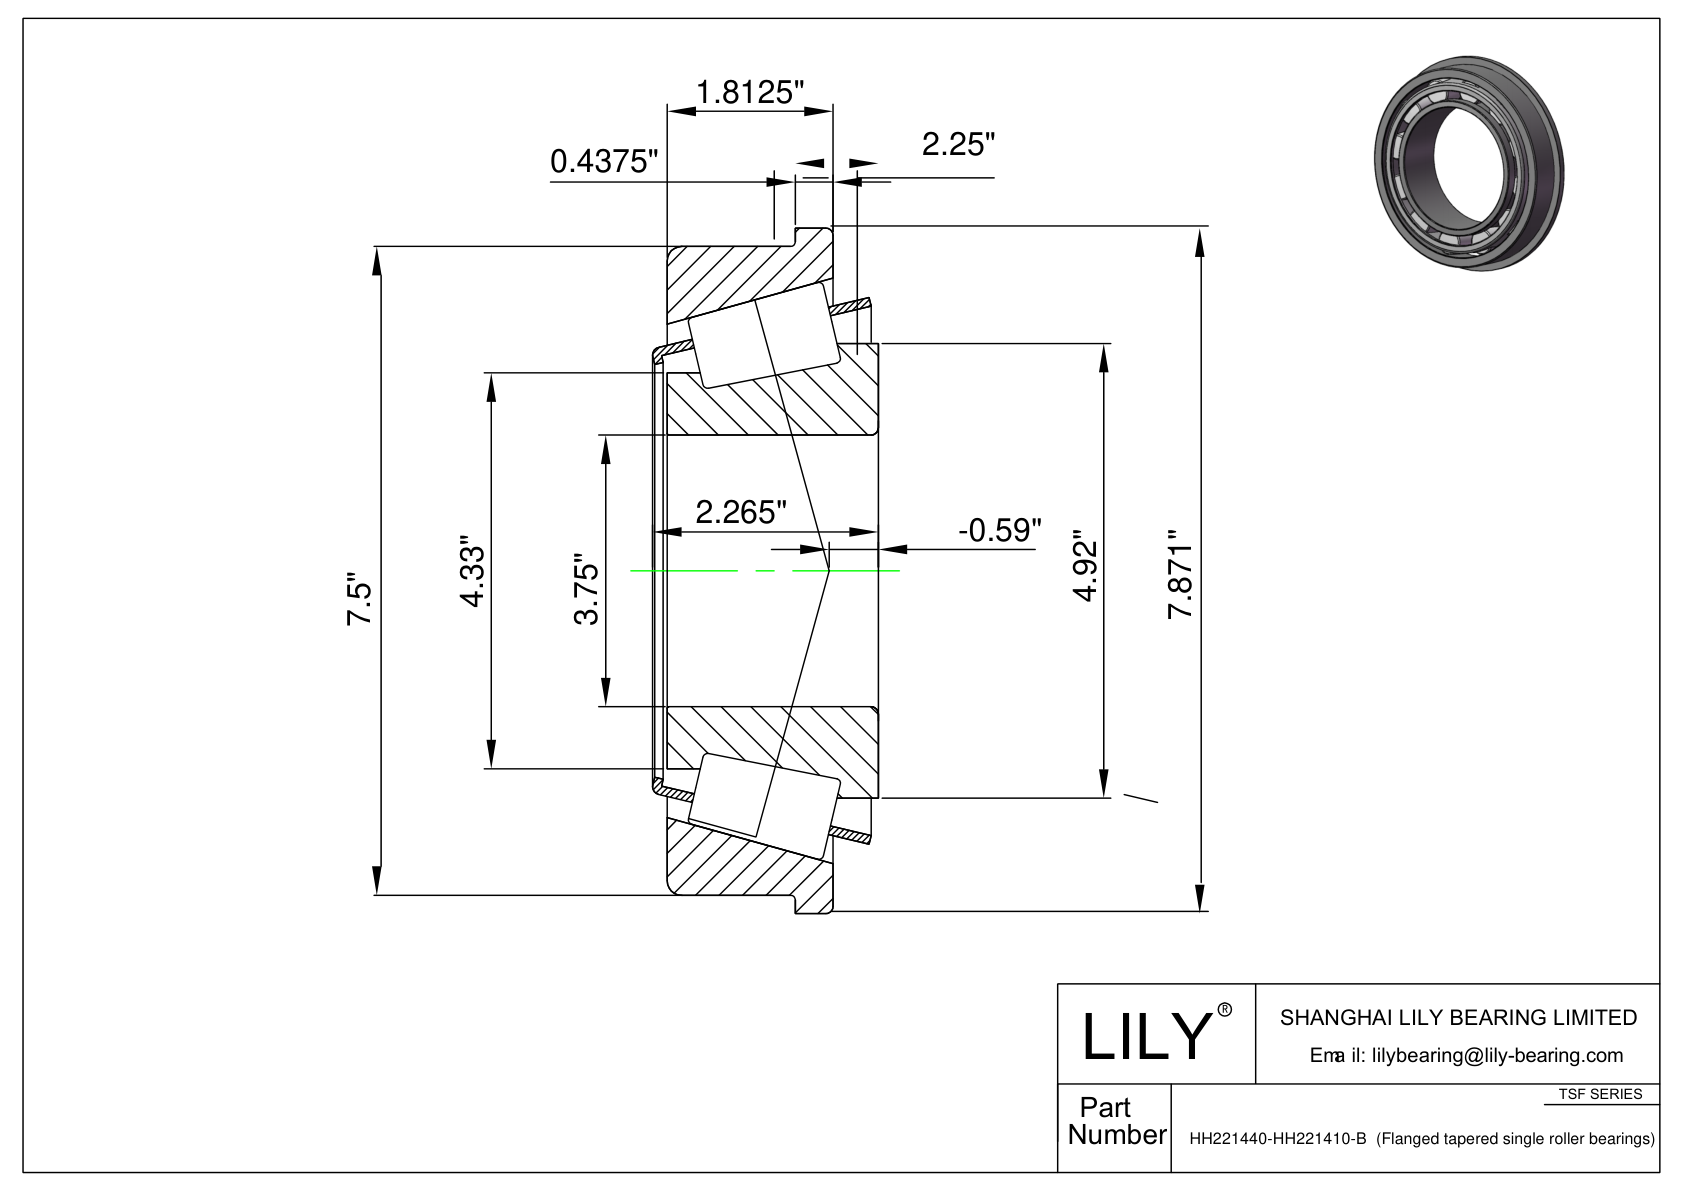 HH221440-HH221410-B TSF (Tapered Single Roller Bearings with Flange) (Imperial) cad drawing